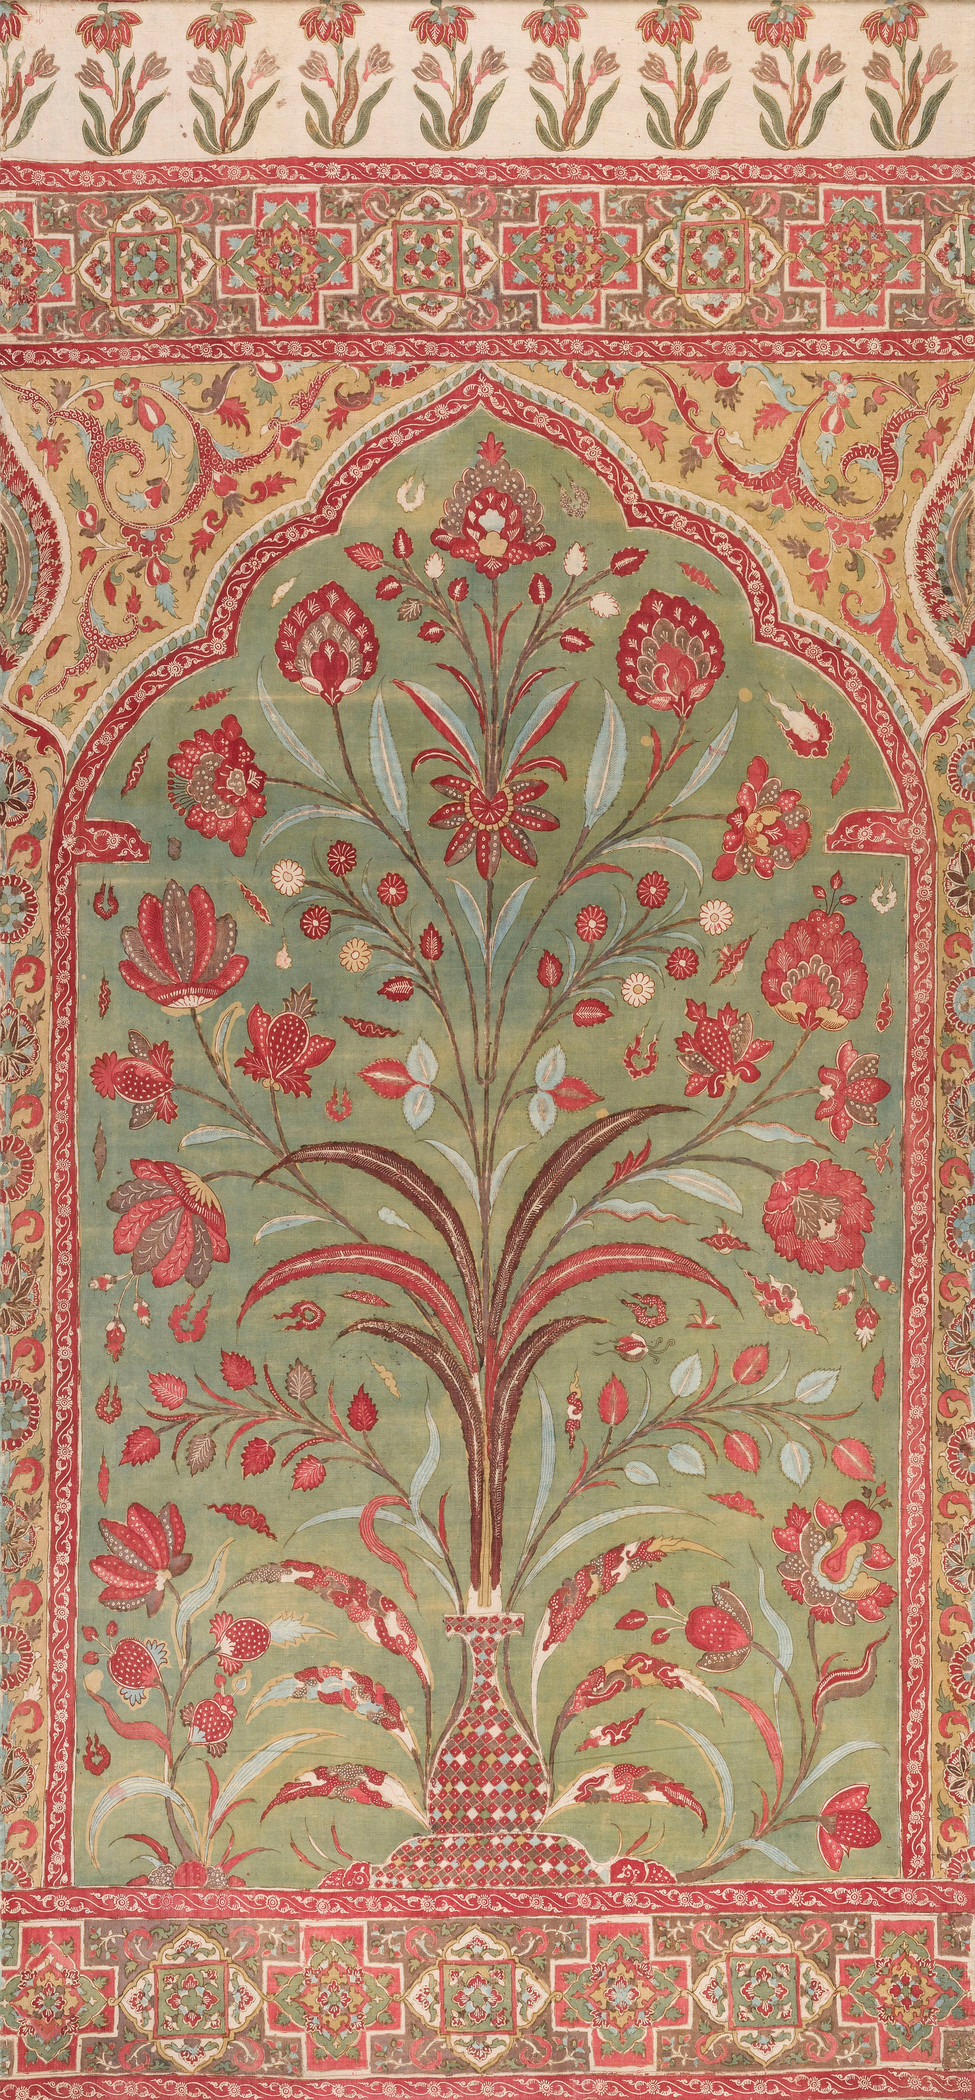 Tent Panel, India, Golconda, c. 1645, Los Angeles County Museum of Art, from the Nasli and Alice Heeramaneck Collection, Museum Associates Purchase, photo © Museum Associates/LACMA